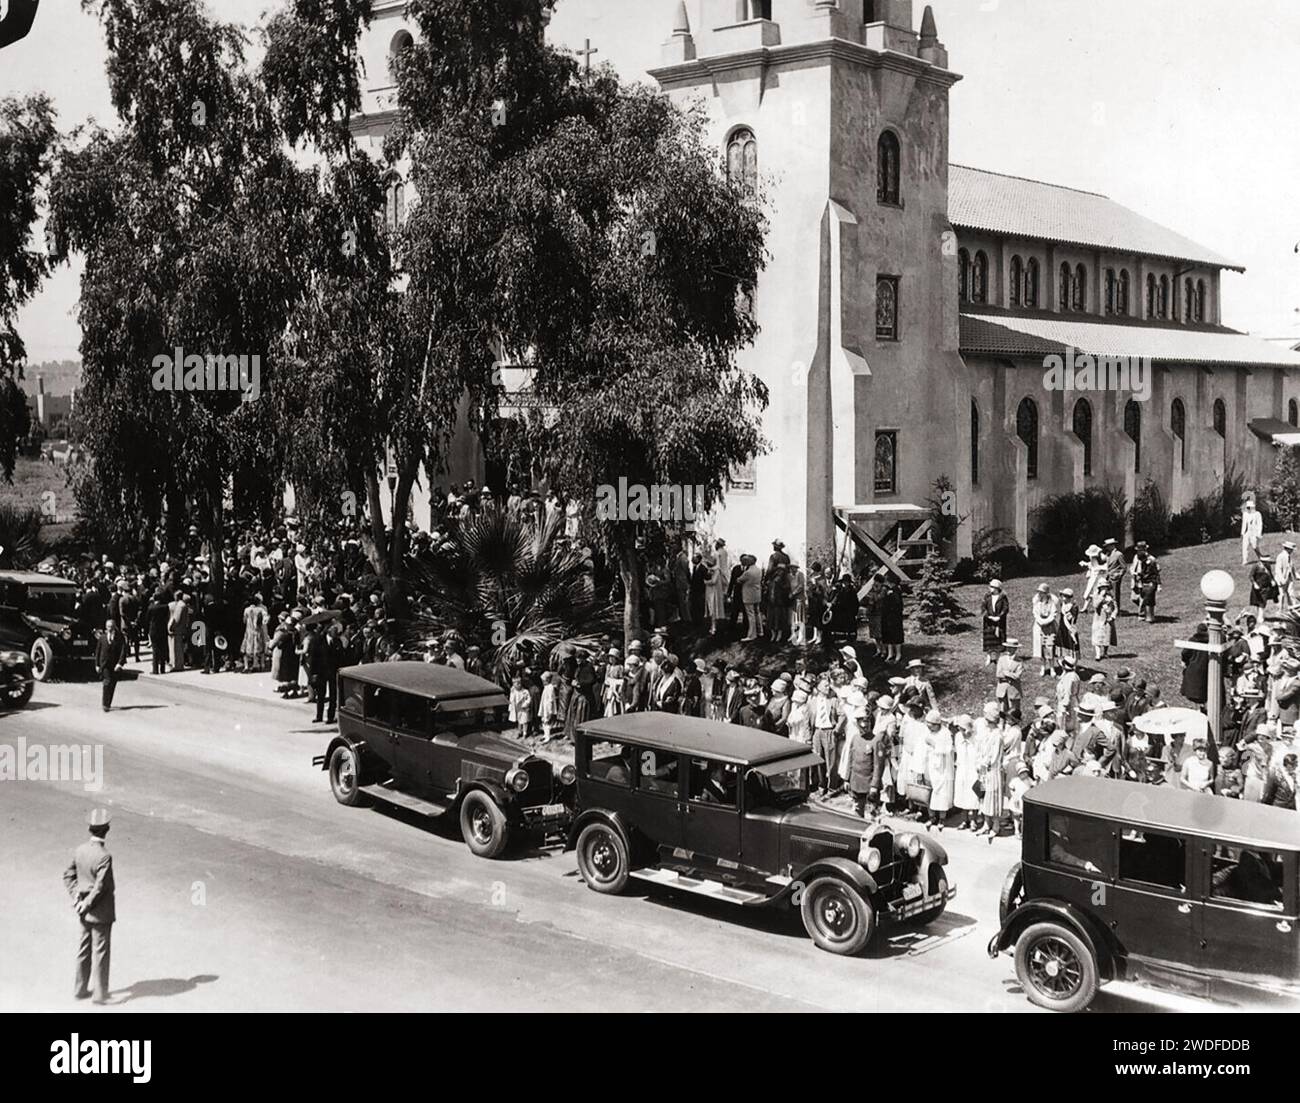 Rudolph Valention's funeral procession. Rudolph died at 31 in 1926 Stock Photo